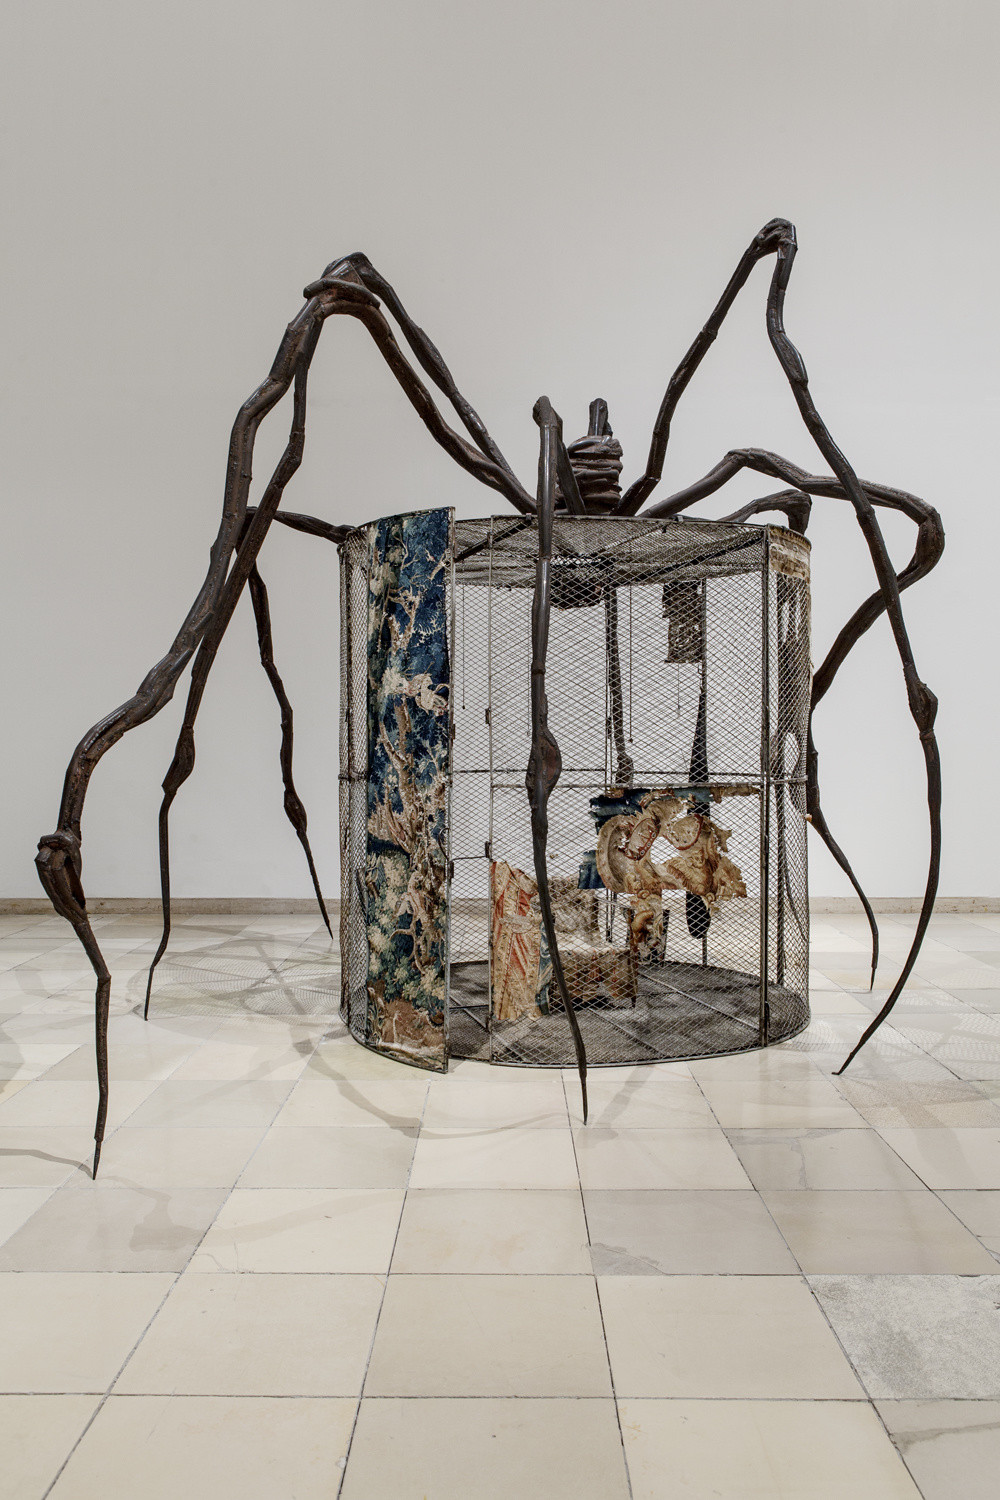 Louise Bourgeois. Spider (Cell). 1997